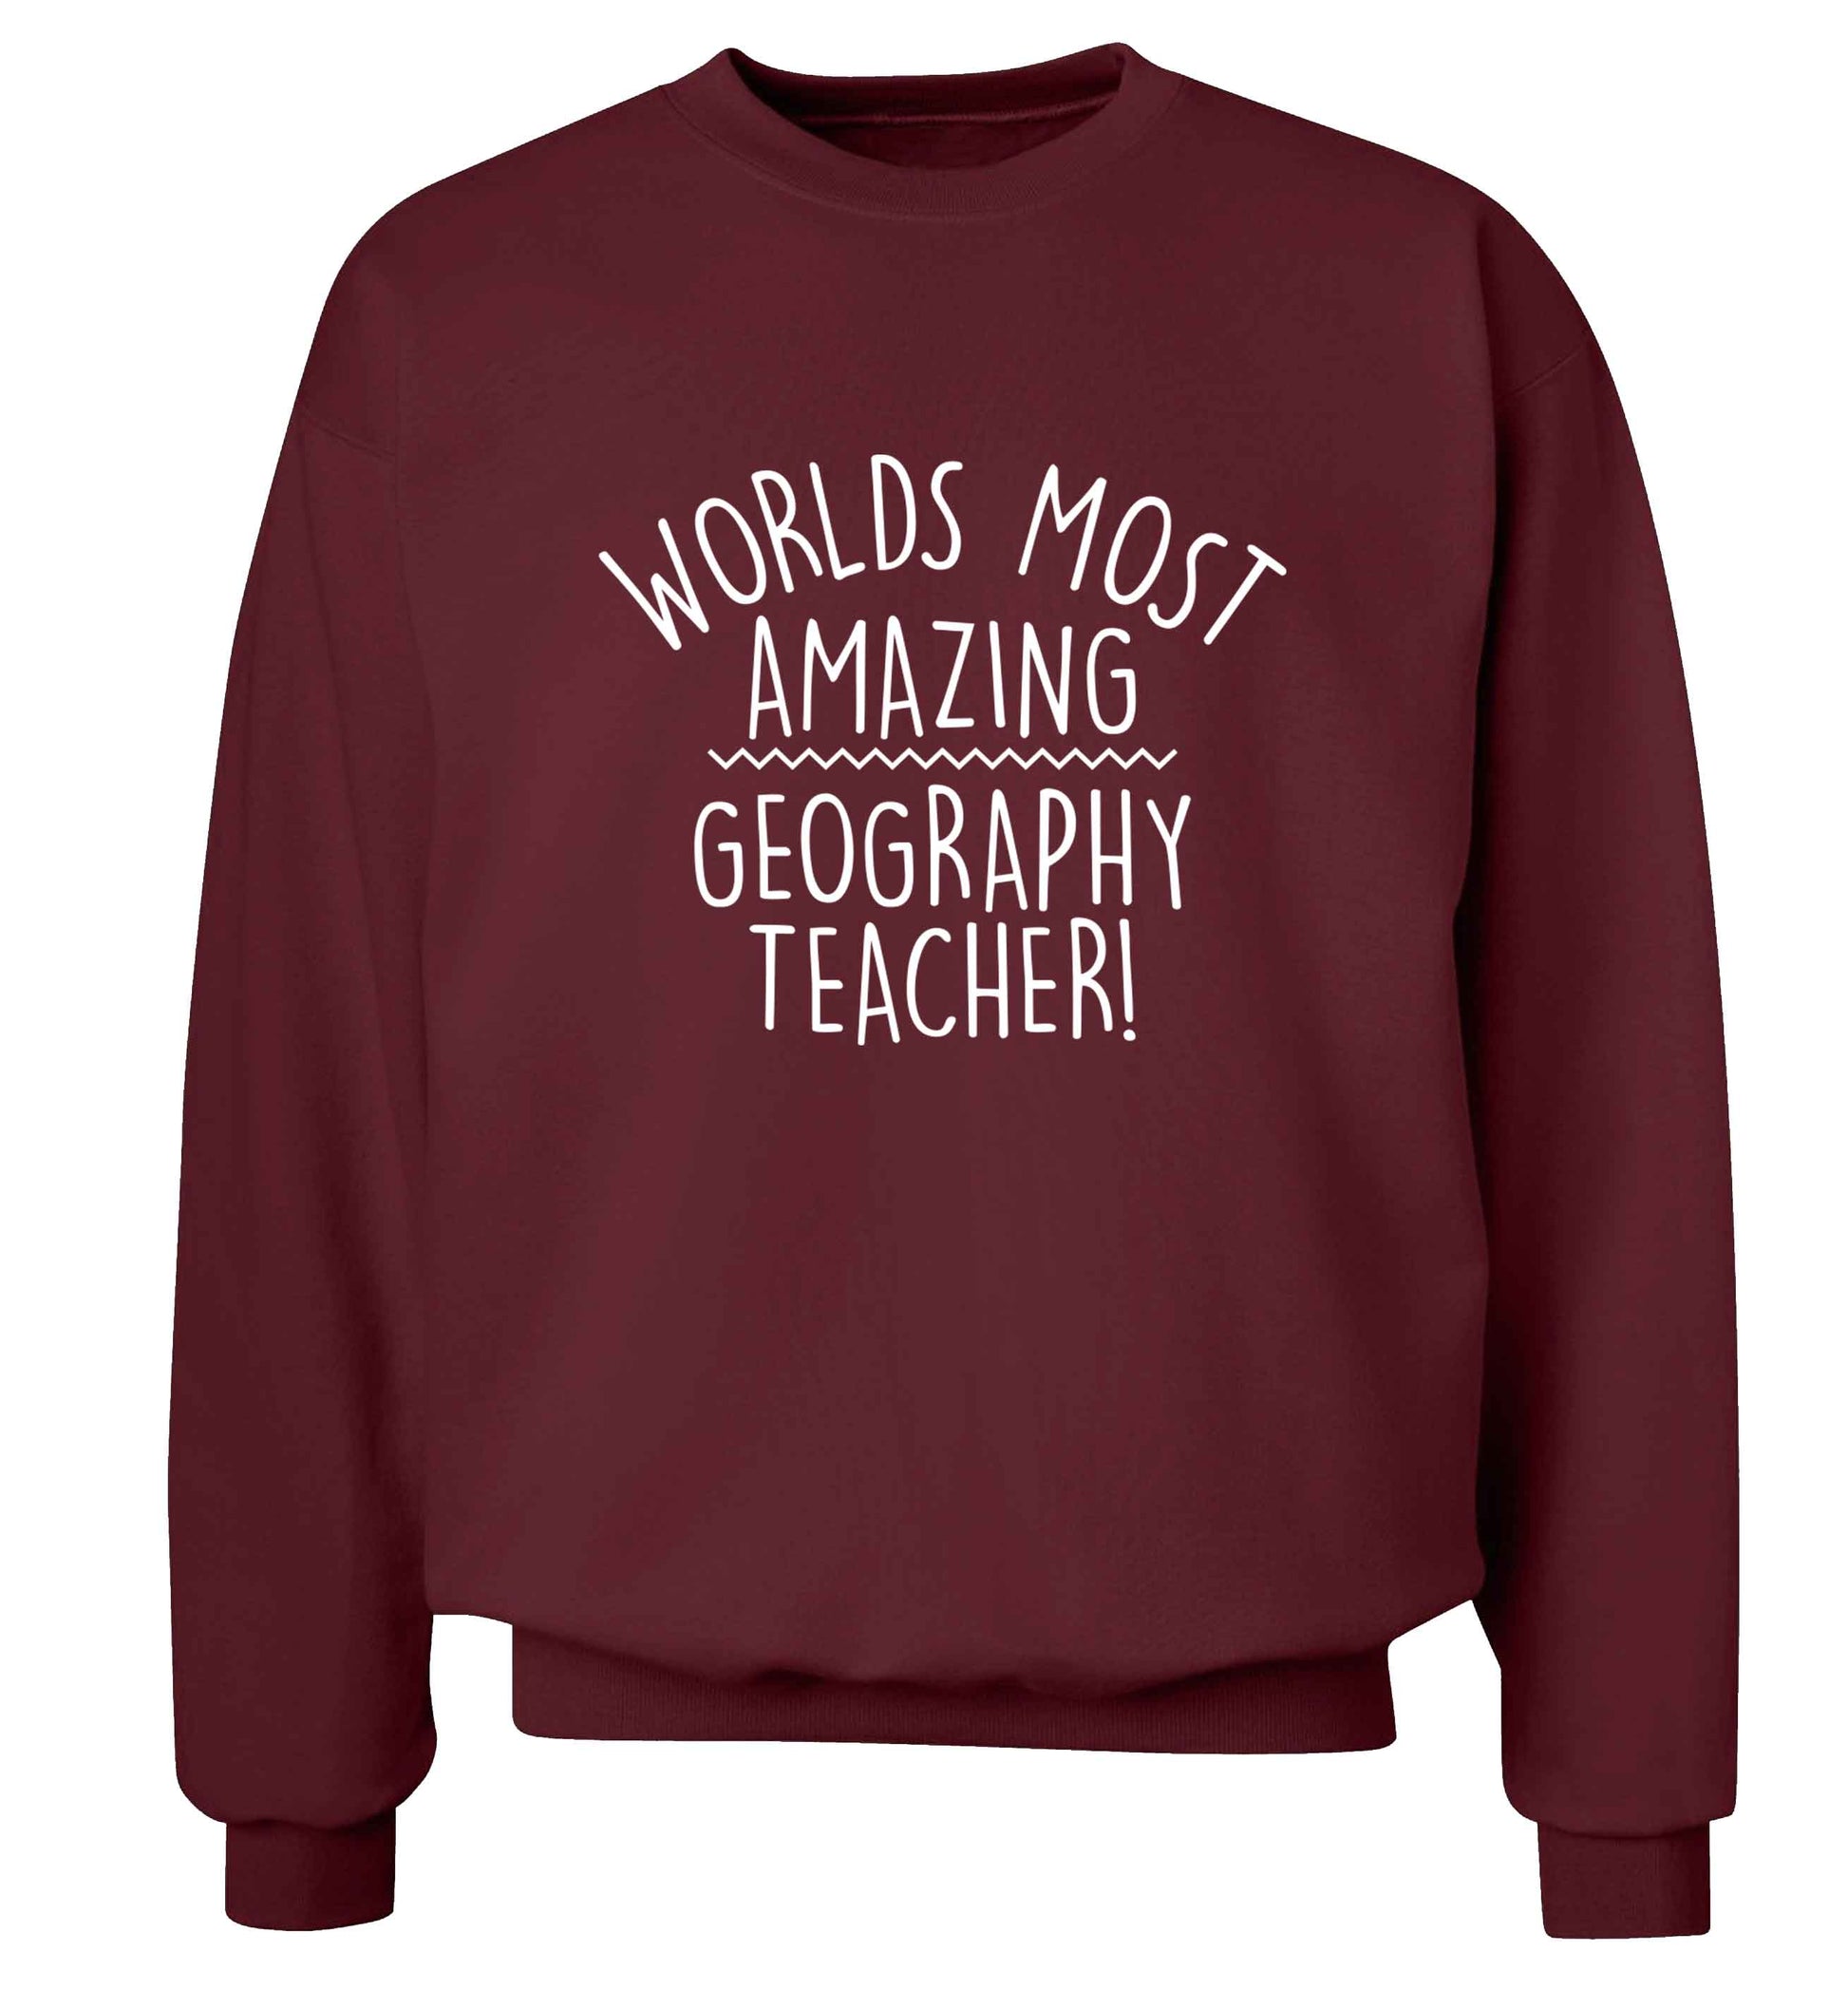 Worlds most amazing geography teacher adult's unisex maroon sweater 2XL